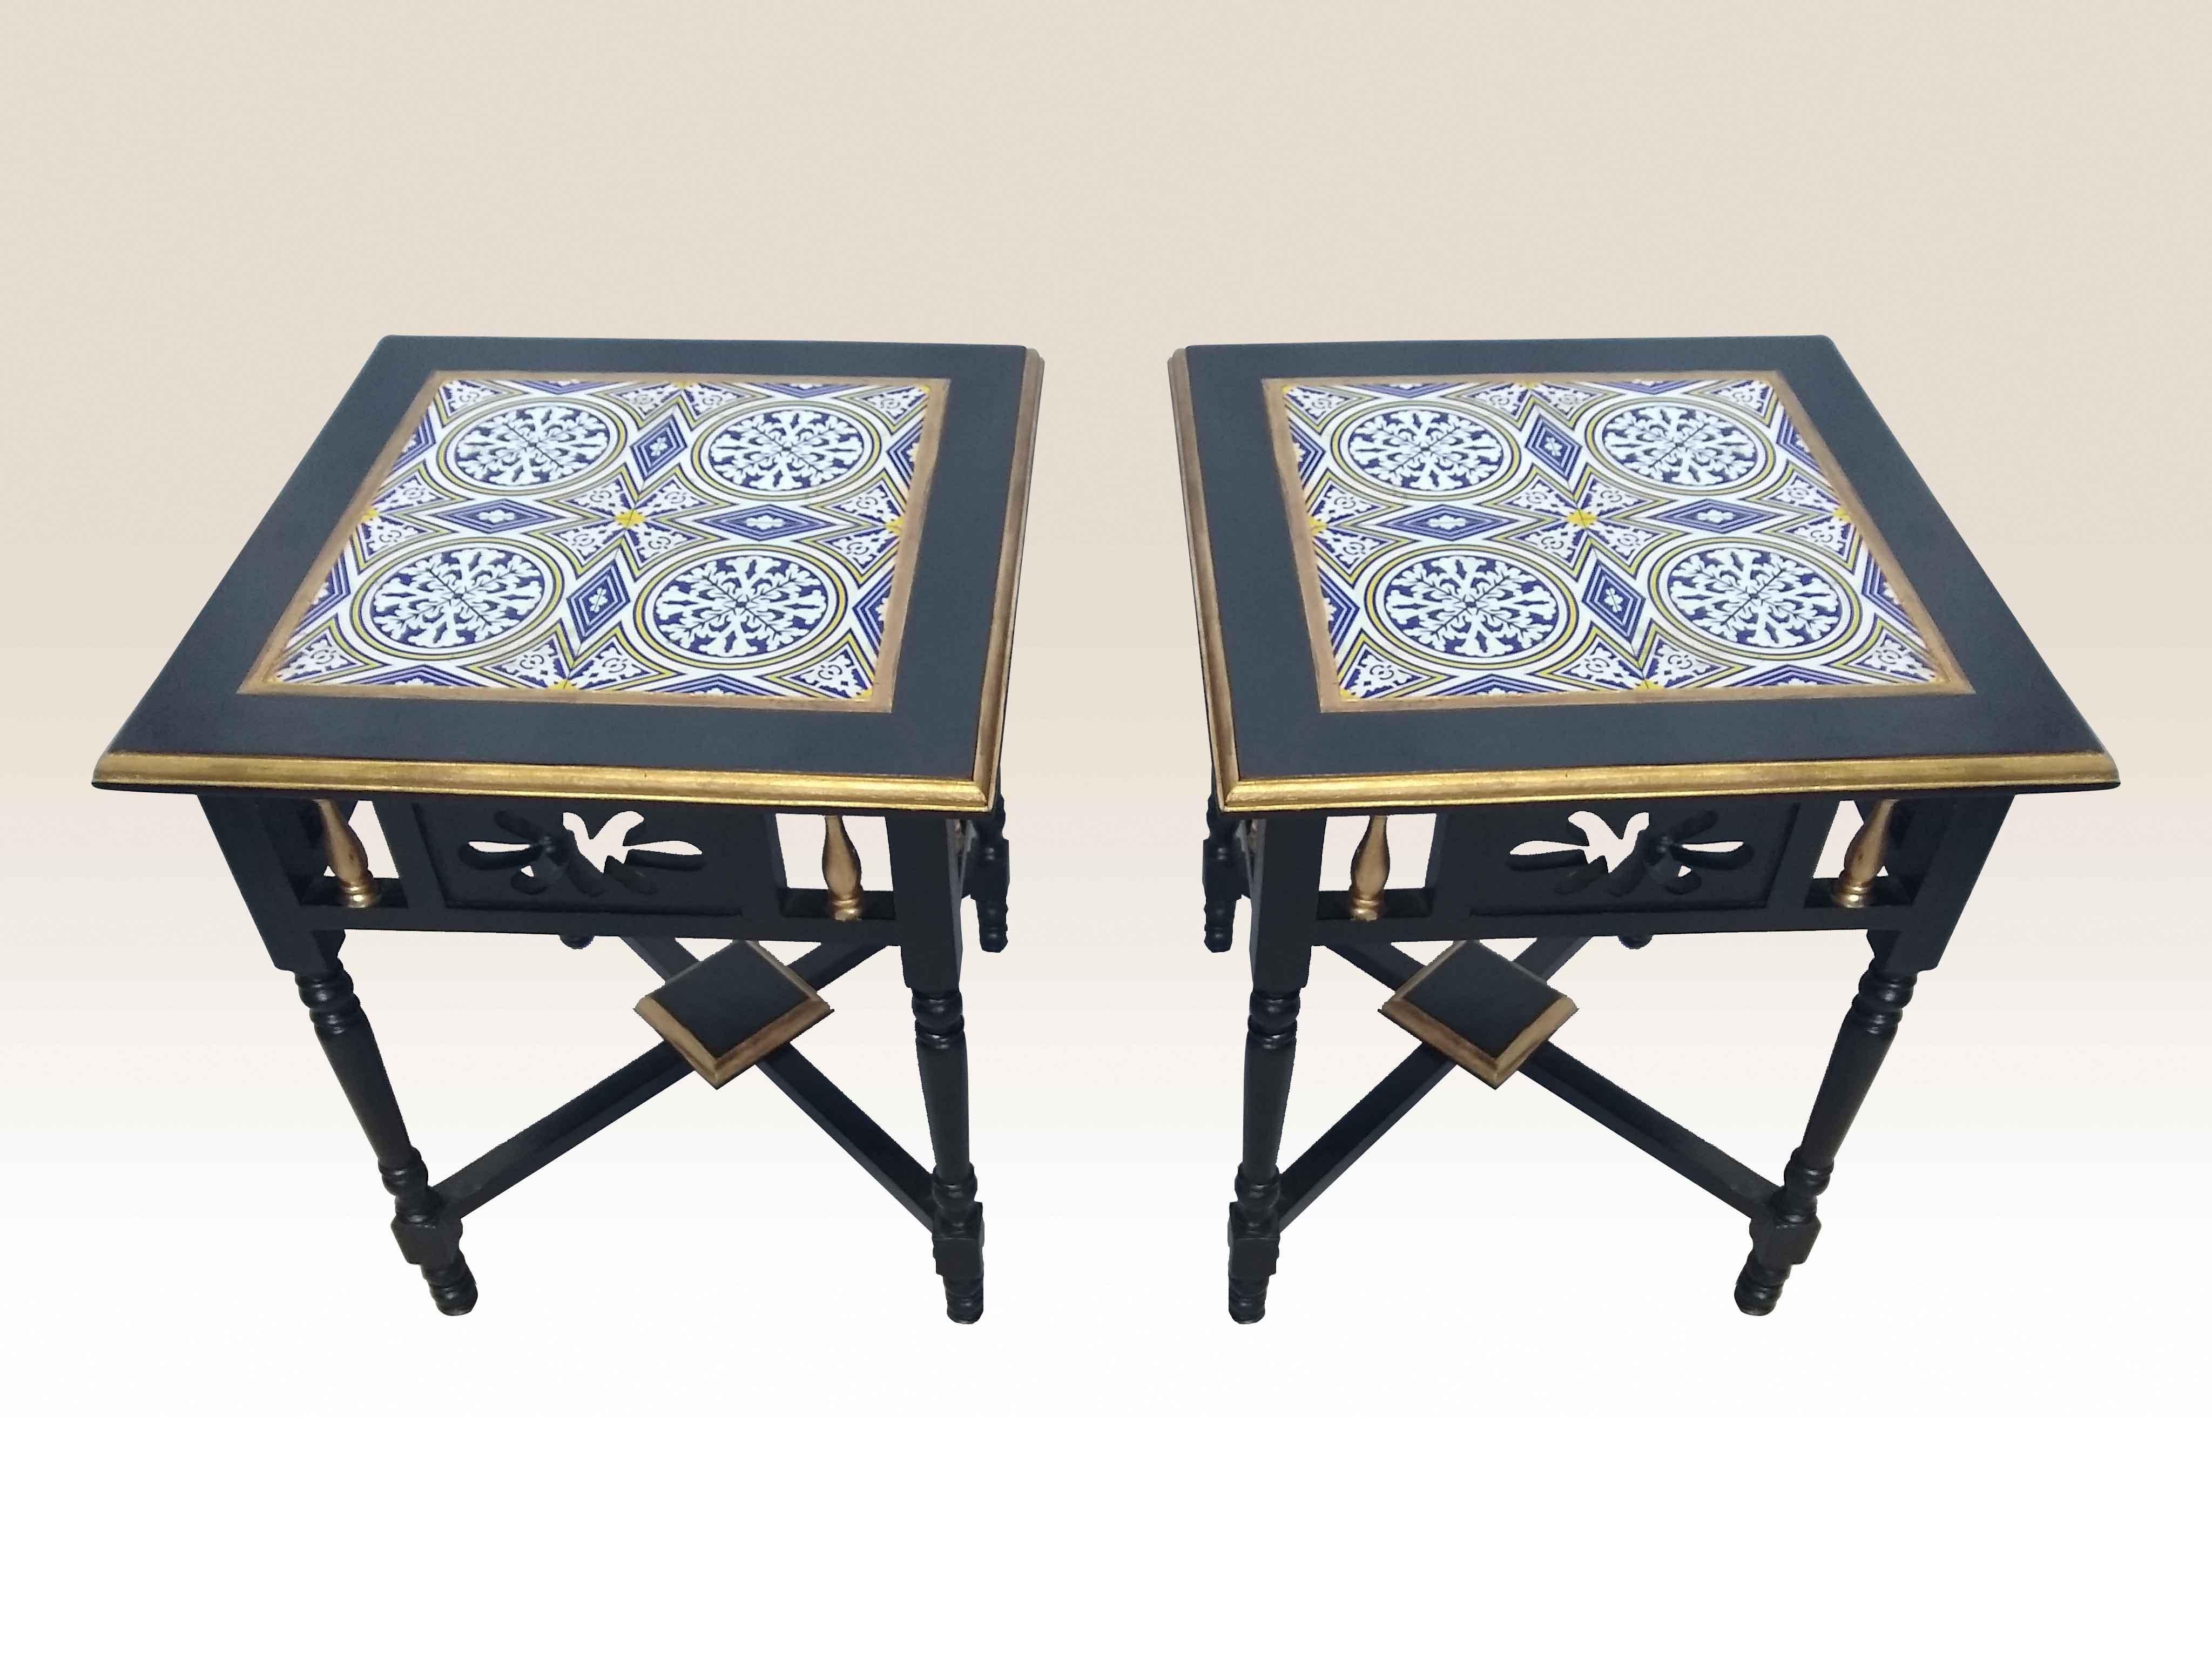 Pair of rosewood side tables with cut-out design work on the sides and painted gold accents. Four blue, white and yellow tiles create the design on the front, circa 1970s.